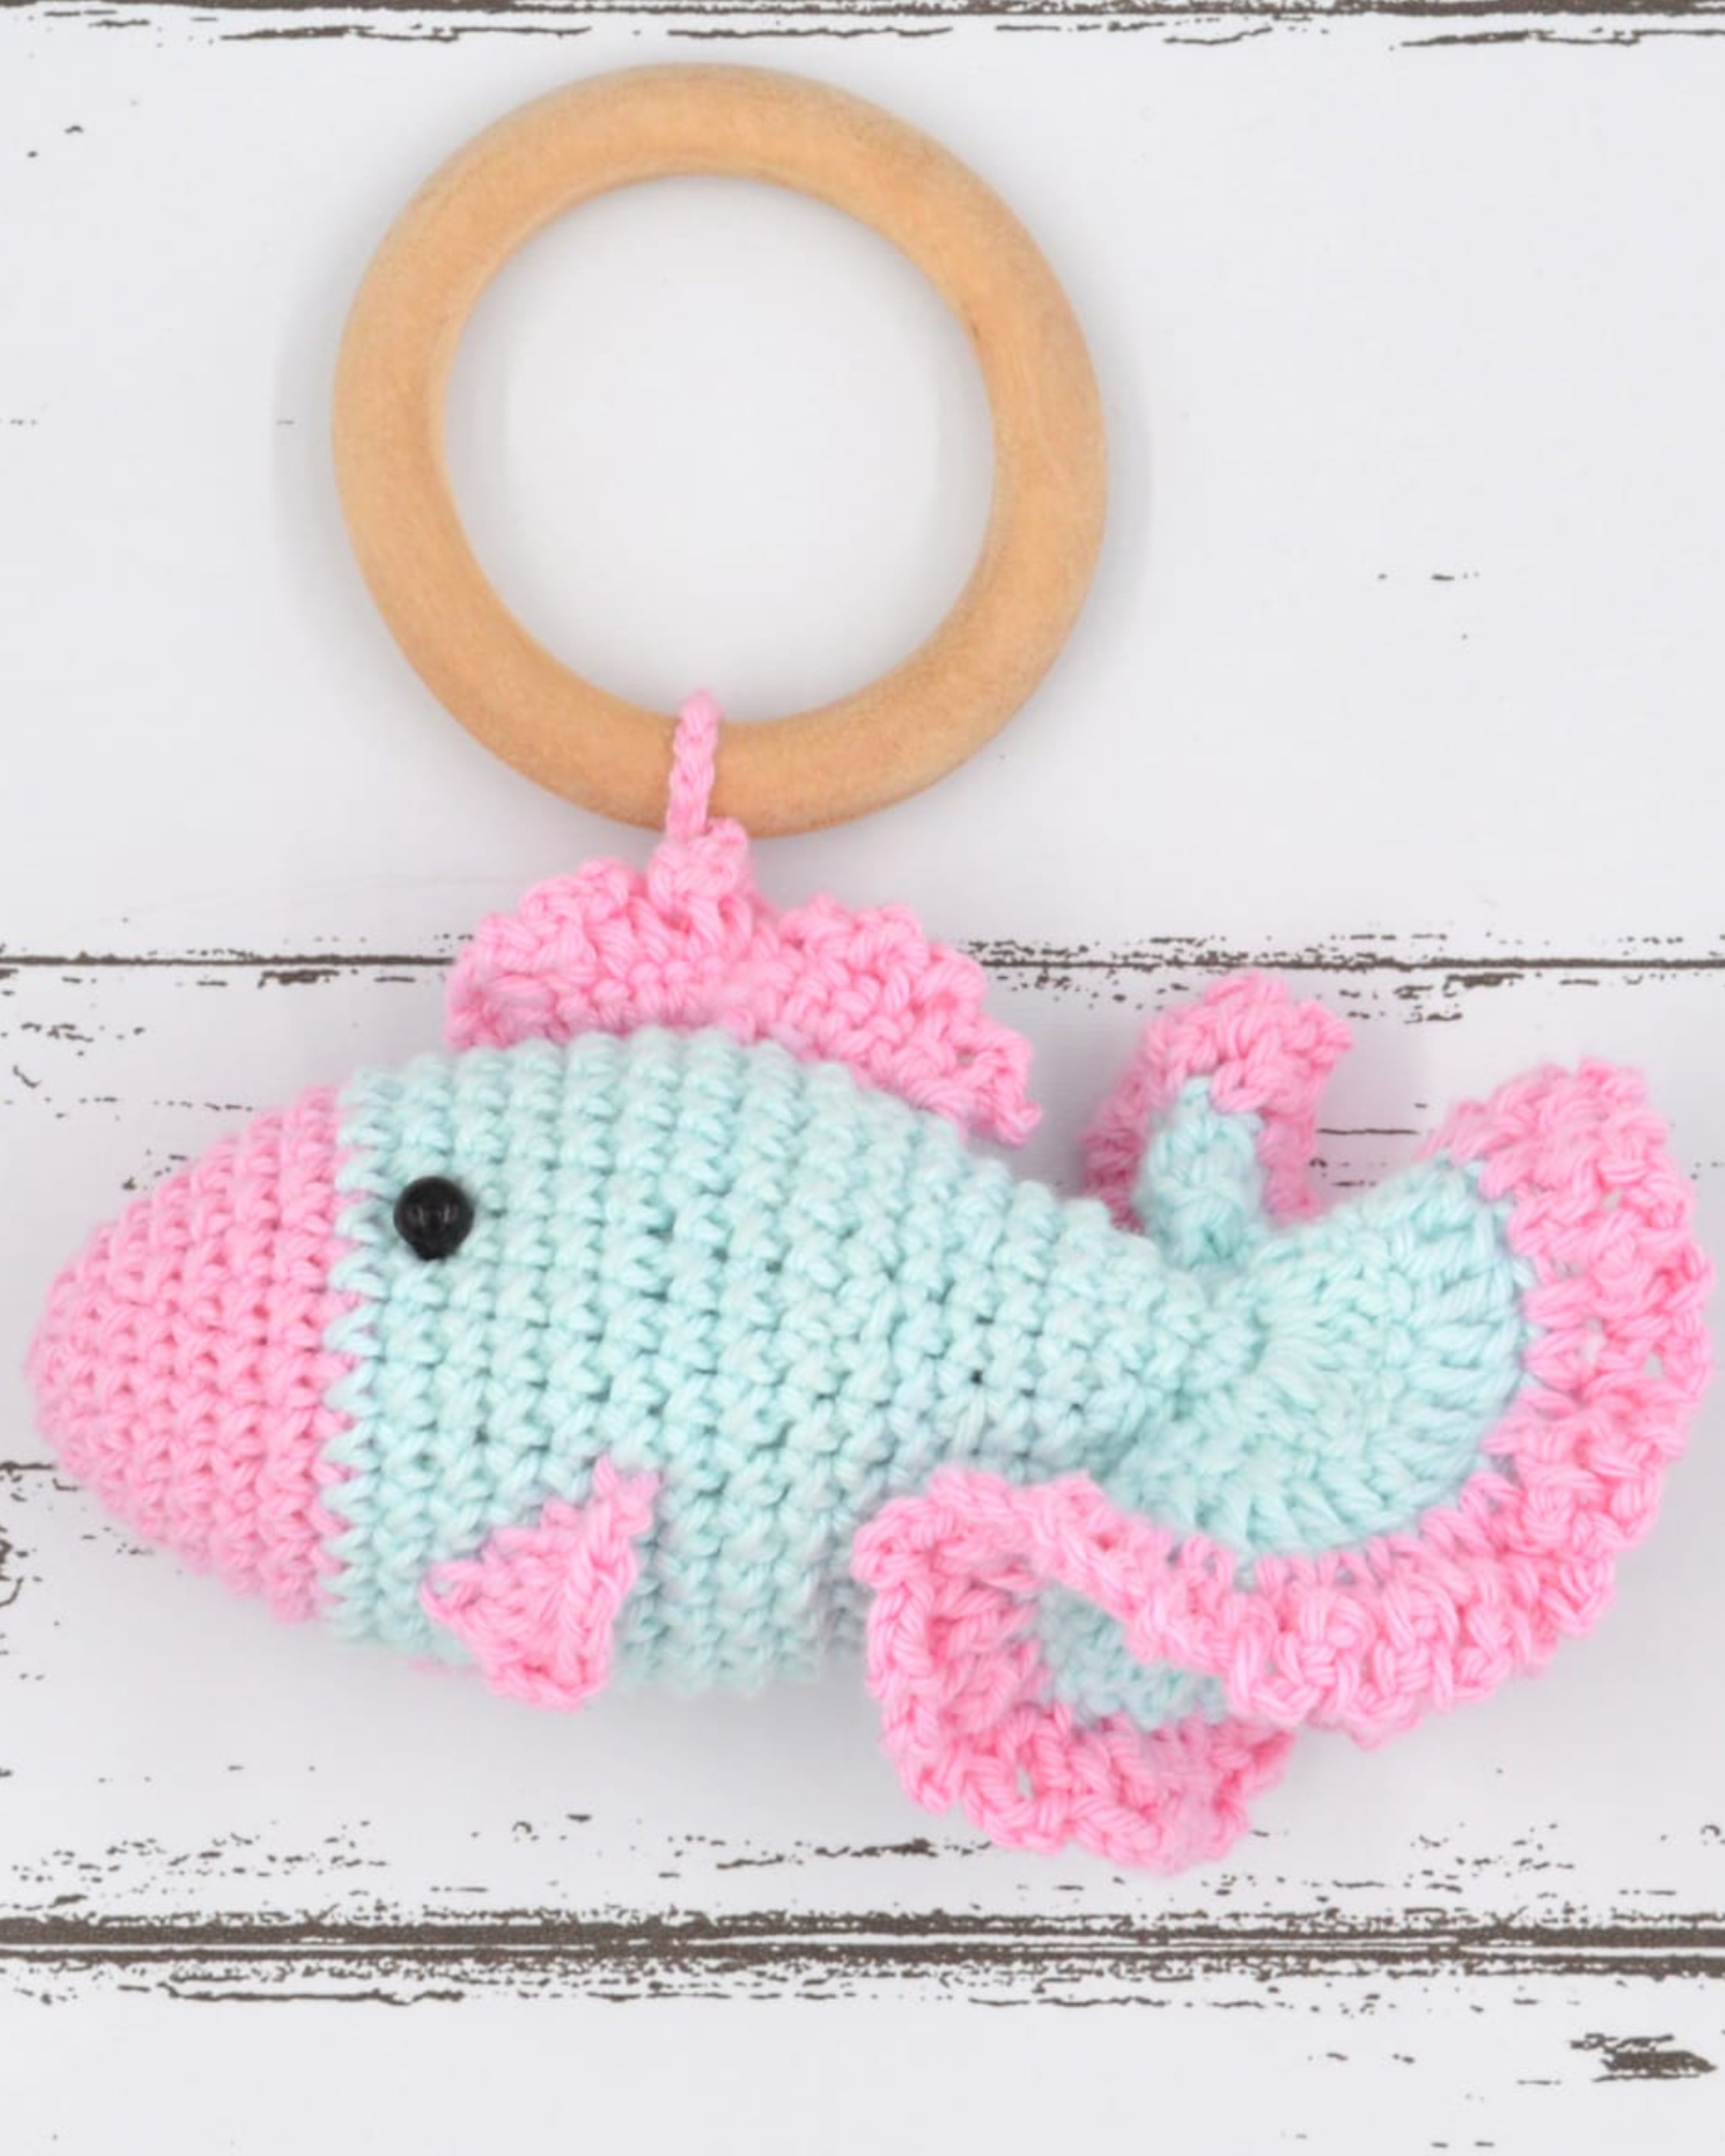 Hand crocheted baby sound rattle - fish